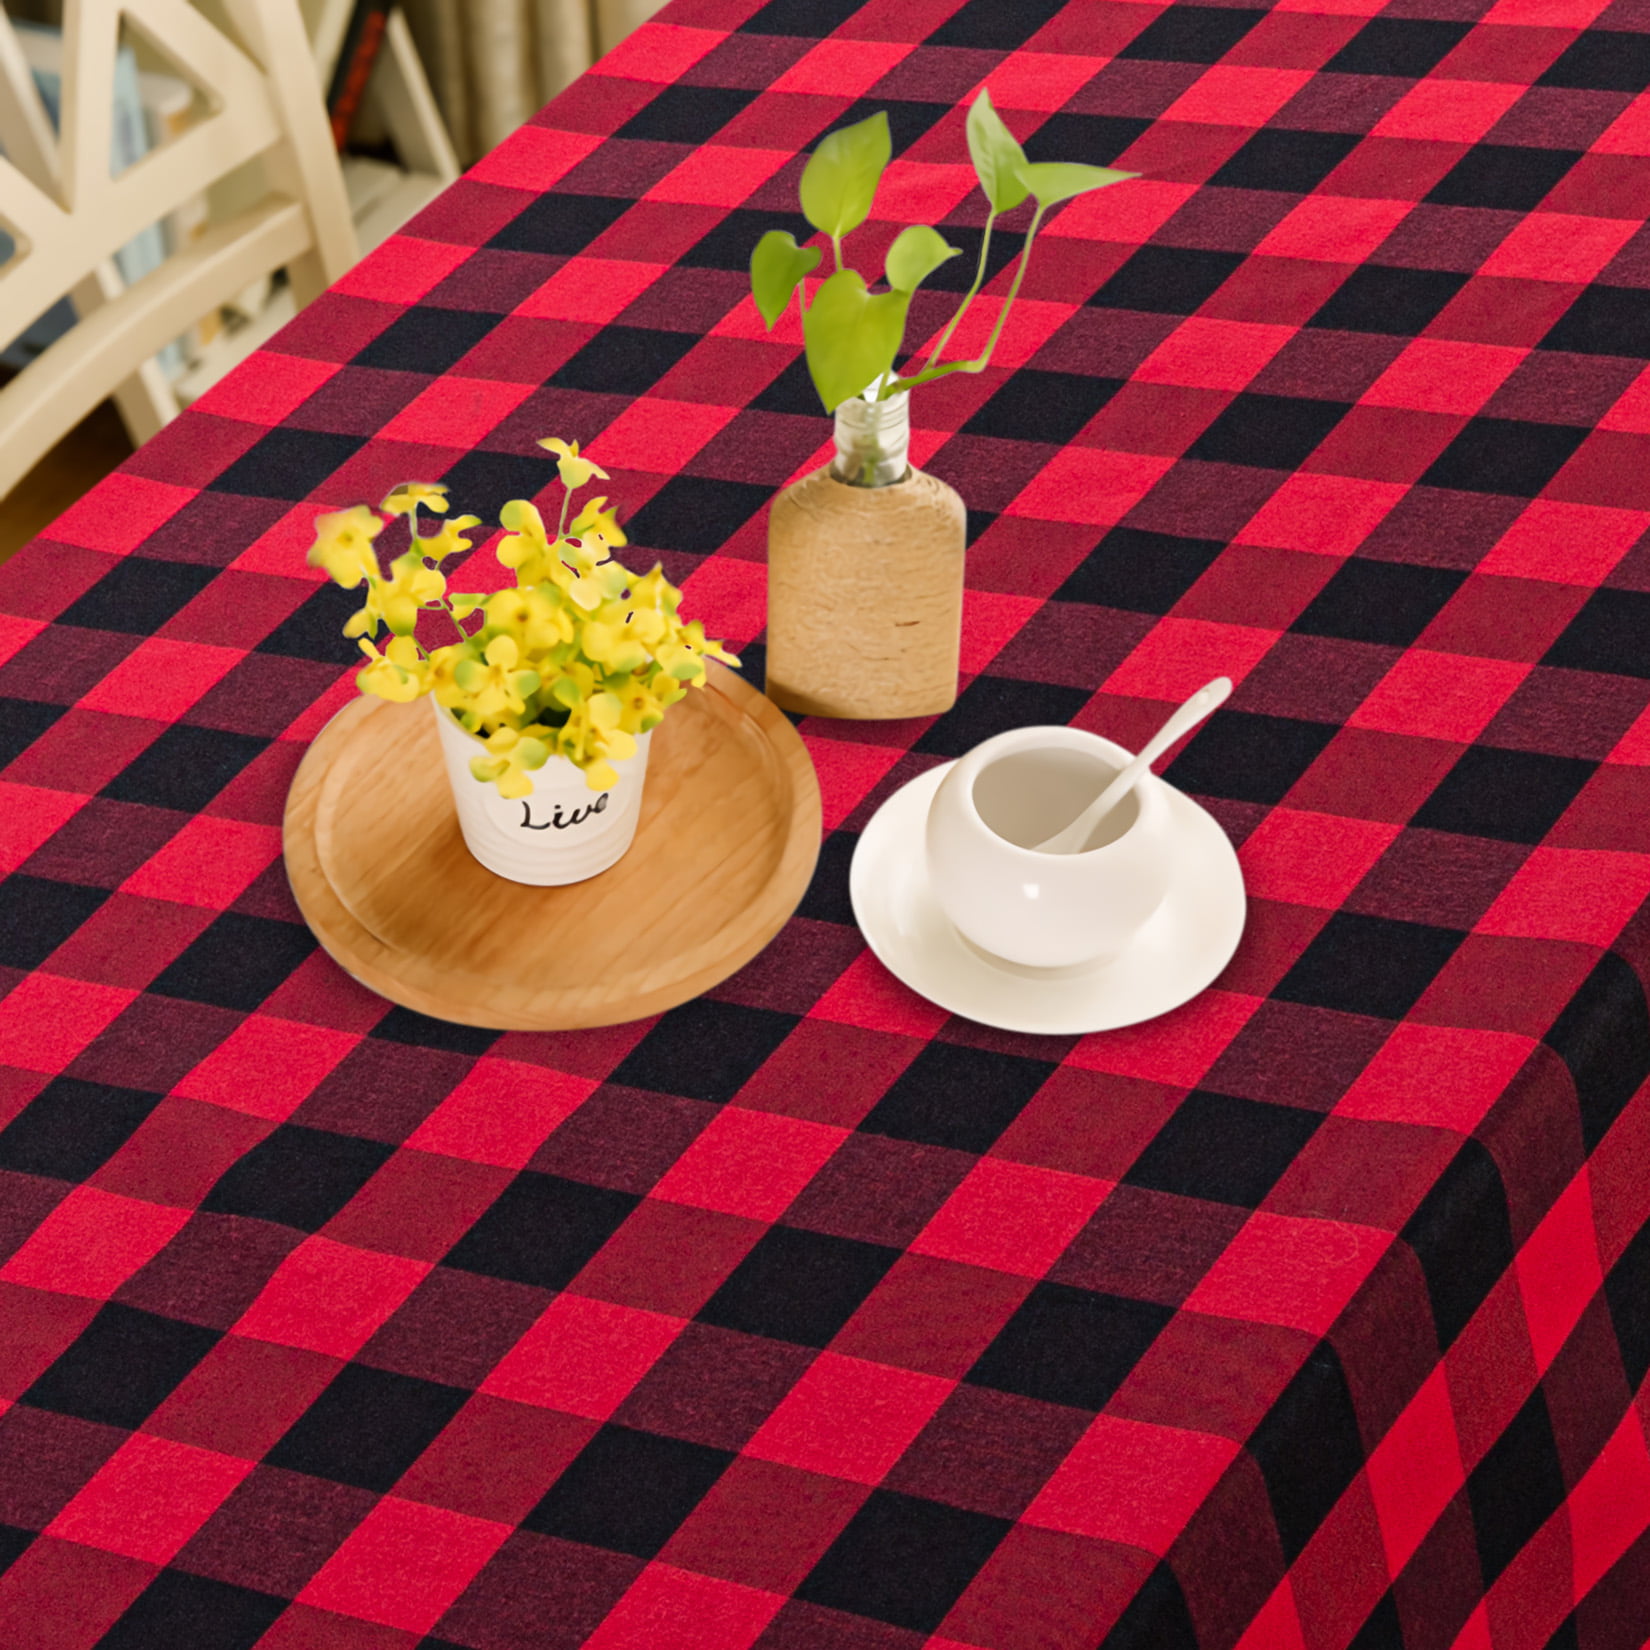 Powersellerusa Dining Table Cloth Elegant Buffalo Plaid Cloth for Dining Room or Kitchen, Classic Farmhouse Country Decor Plaid Gingham Checkered